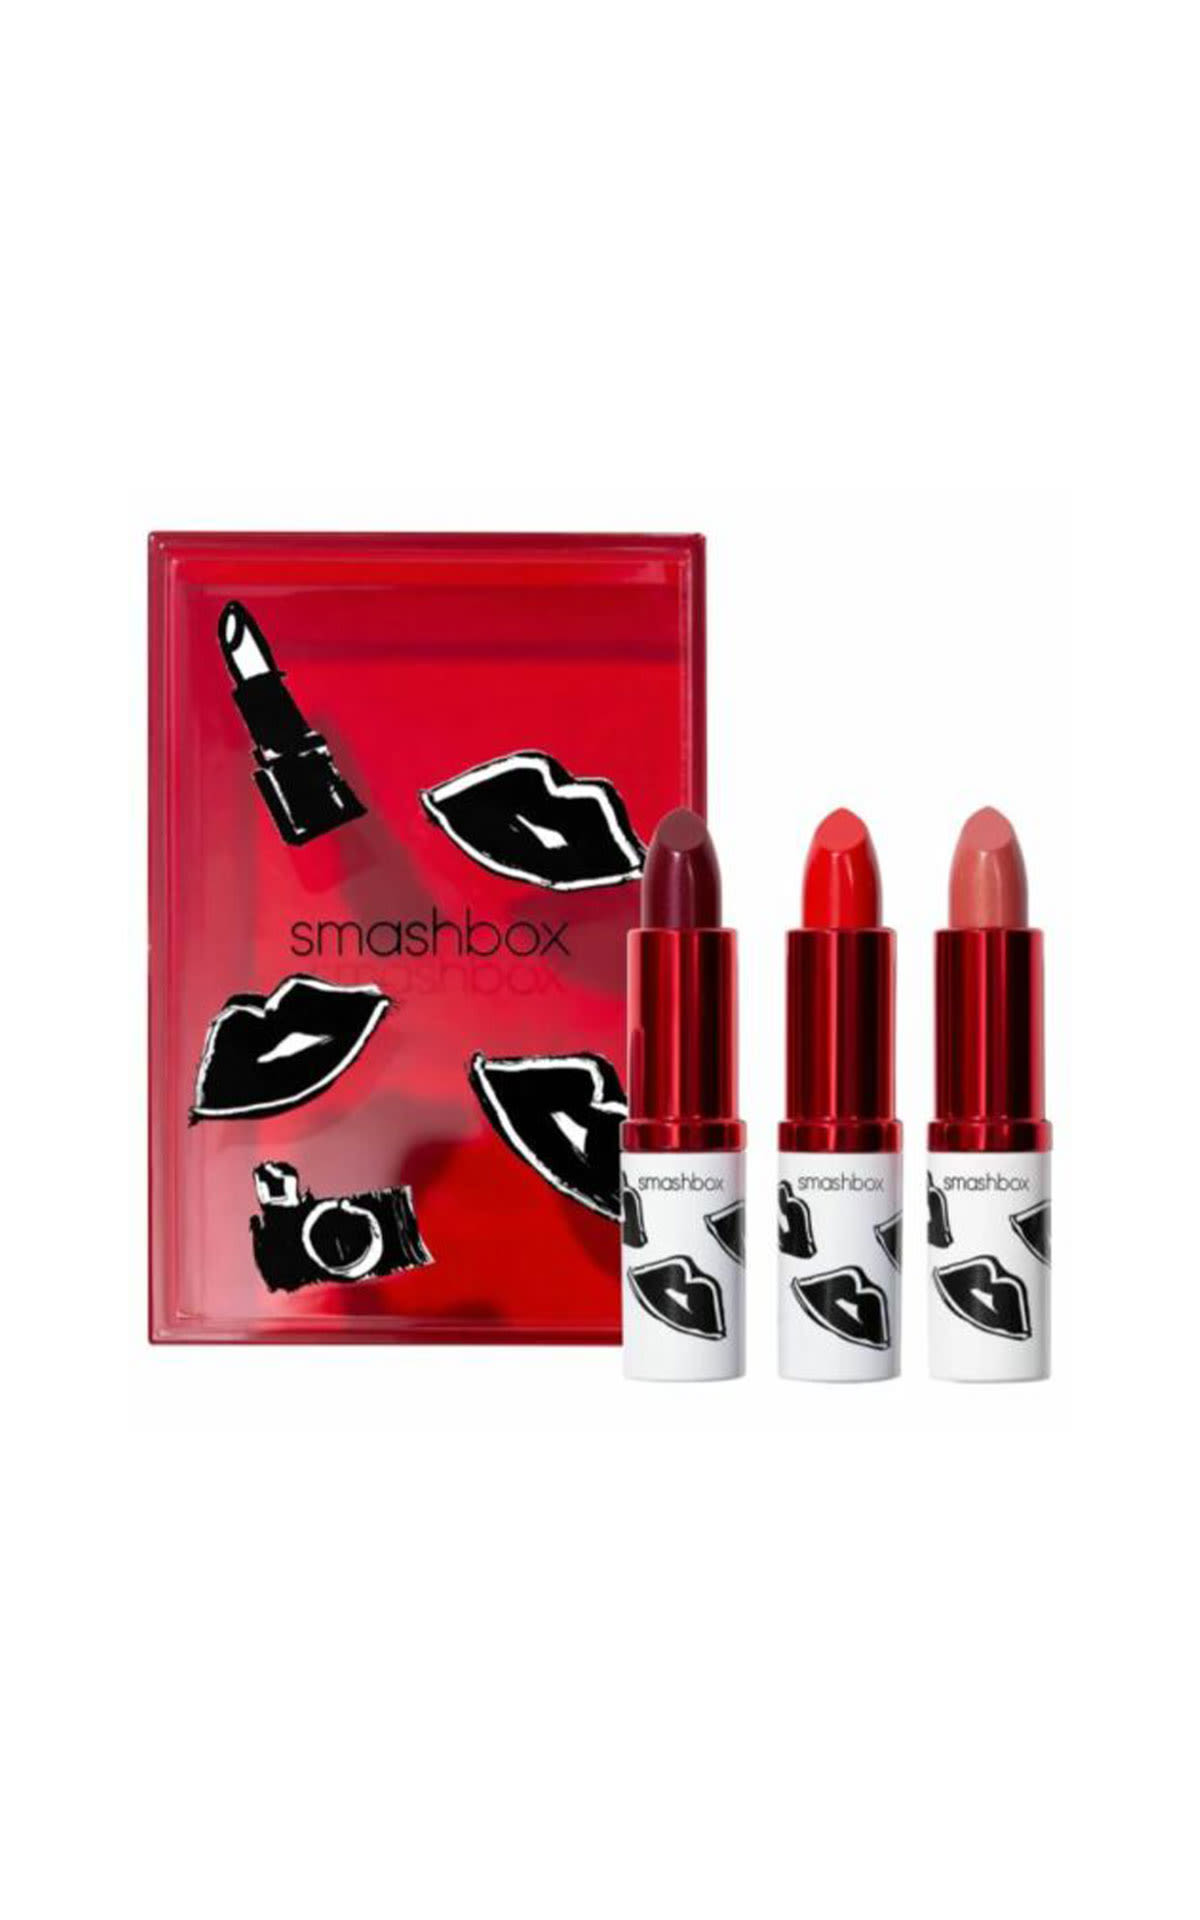 The Cosmetics Company Store Smashbox lipsticks from Bicester Village